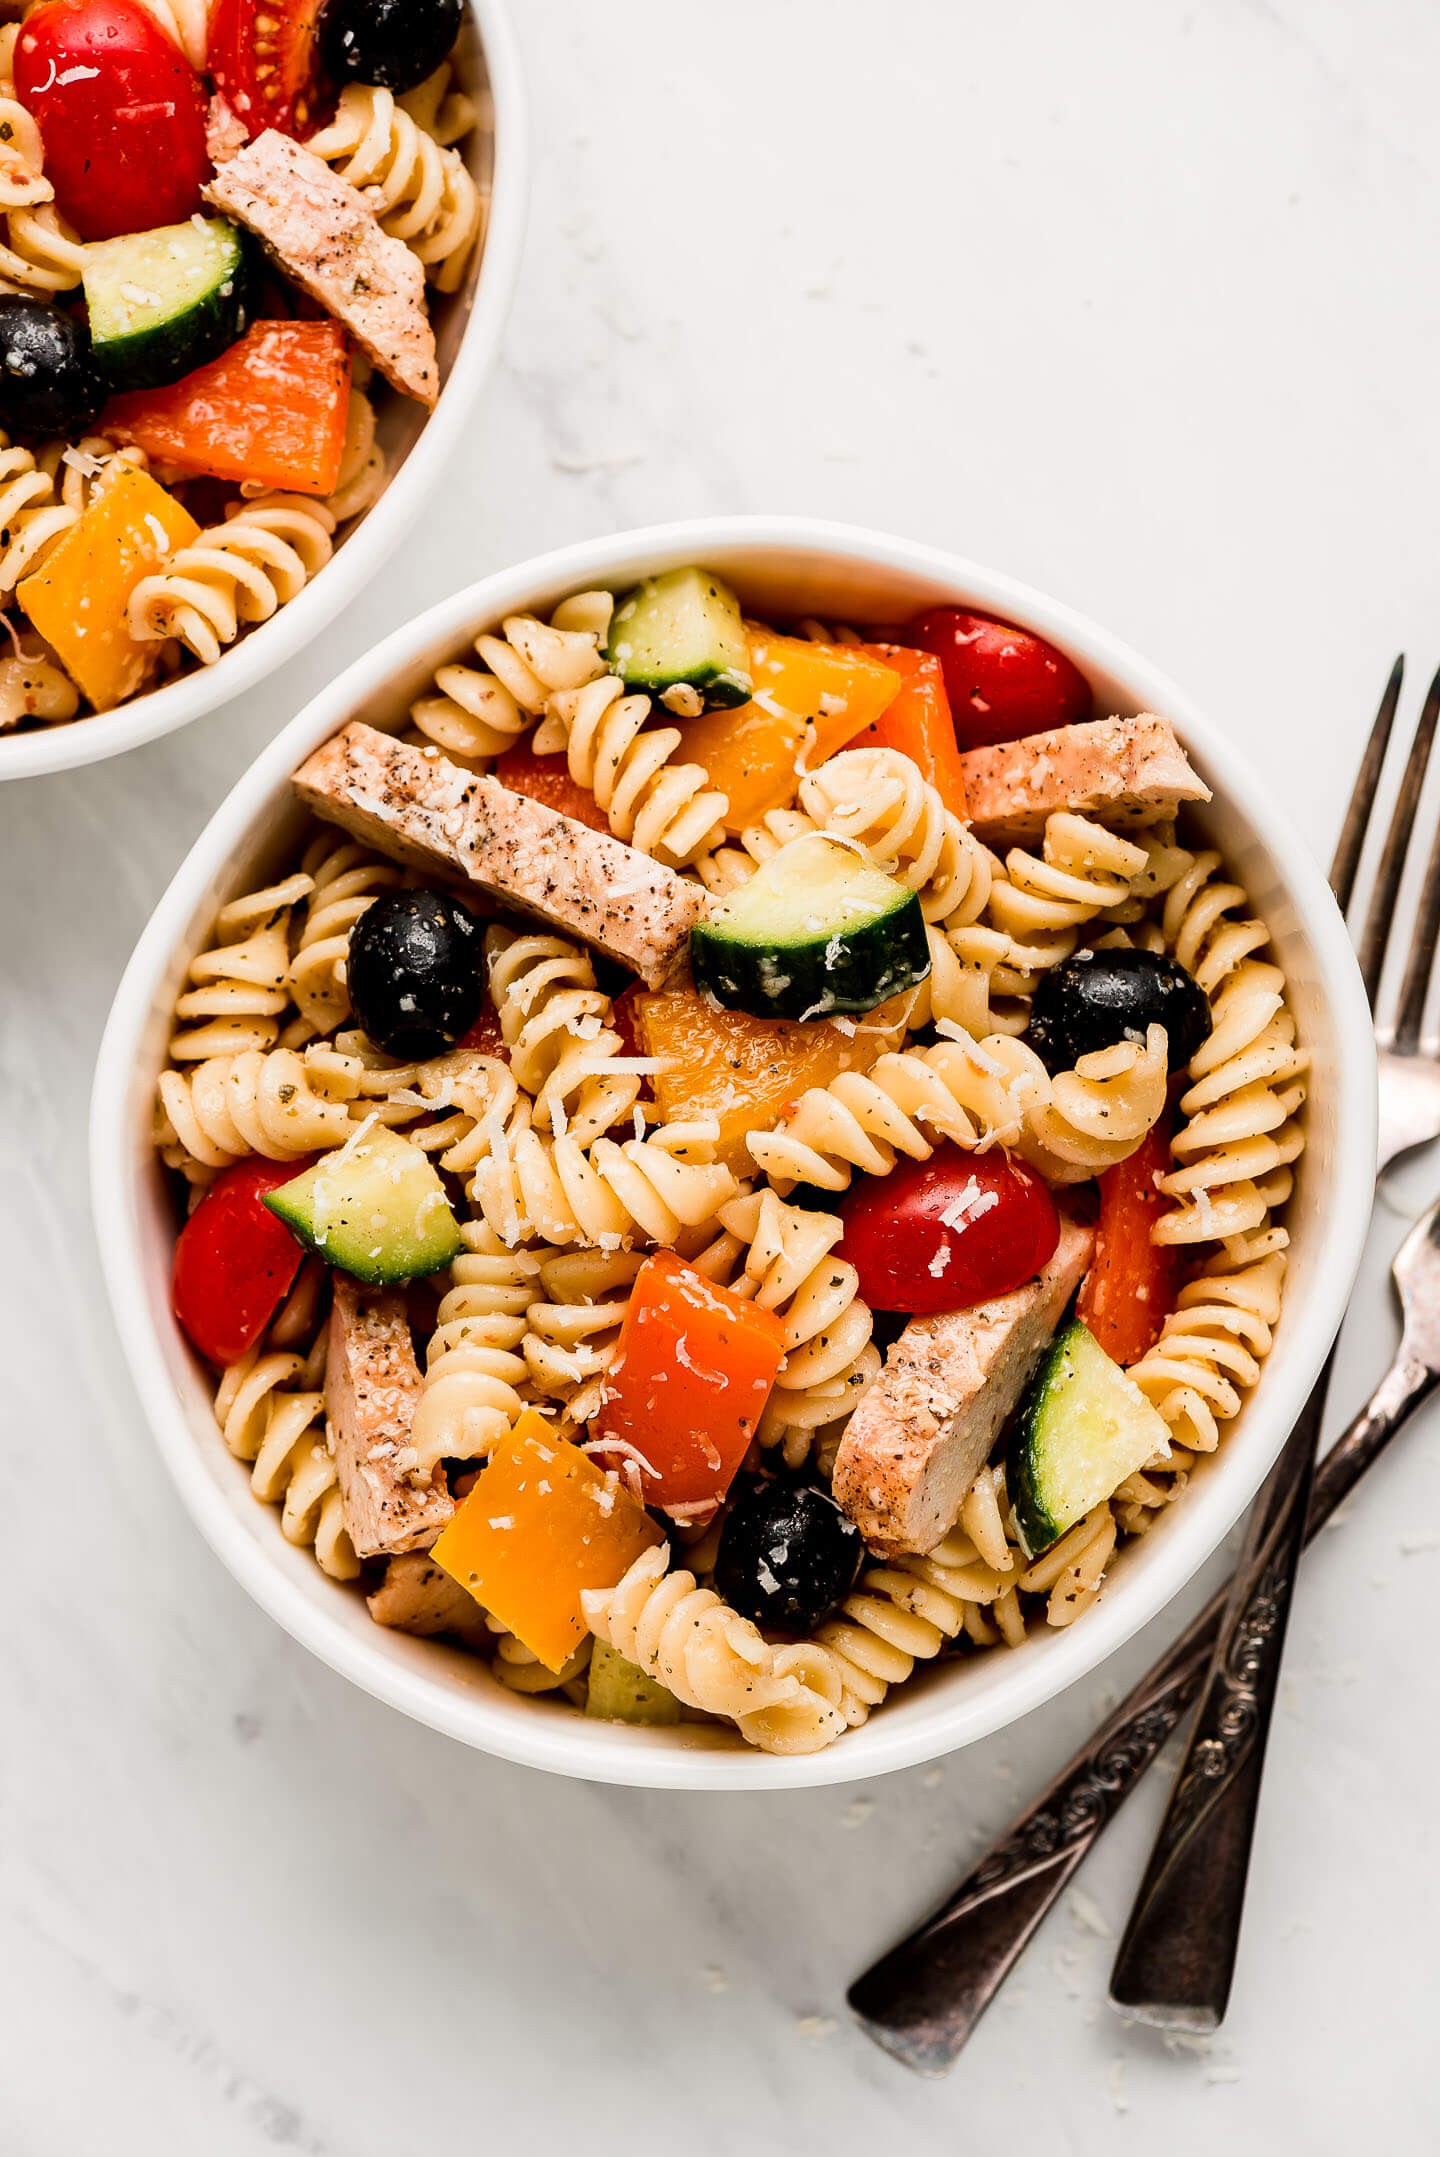 Two bowls of pasta salad with grilled chicken and vegetables.